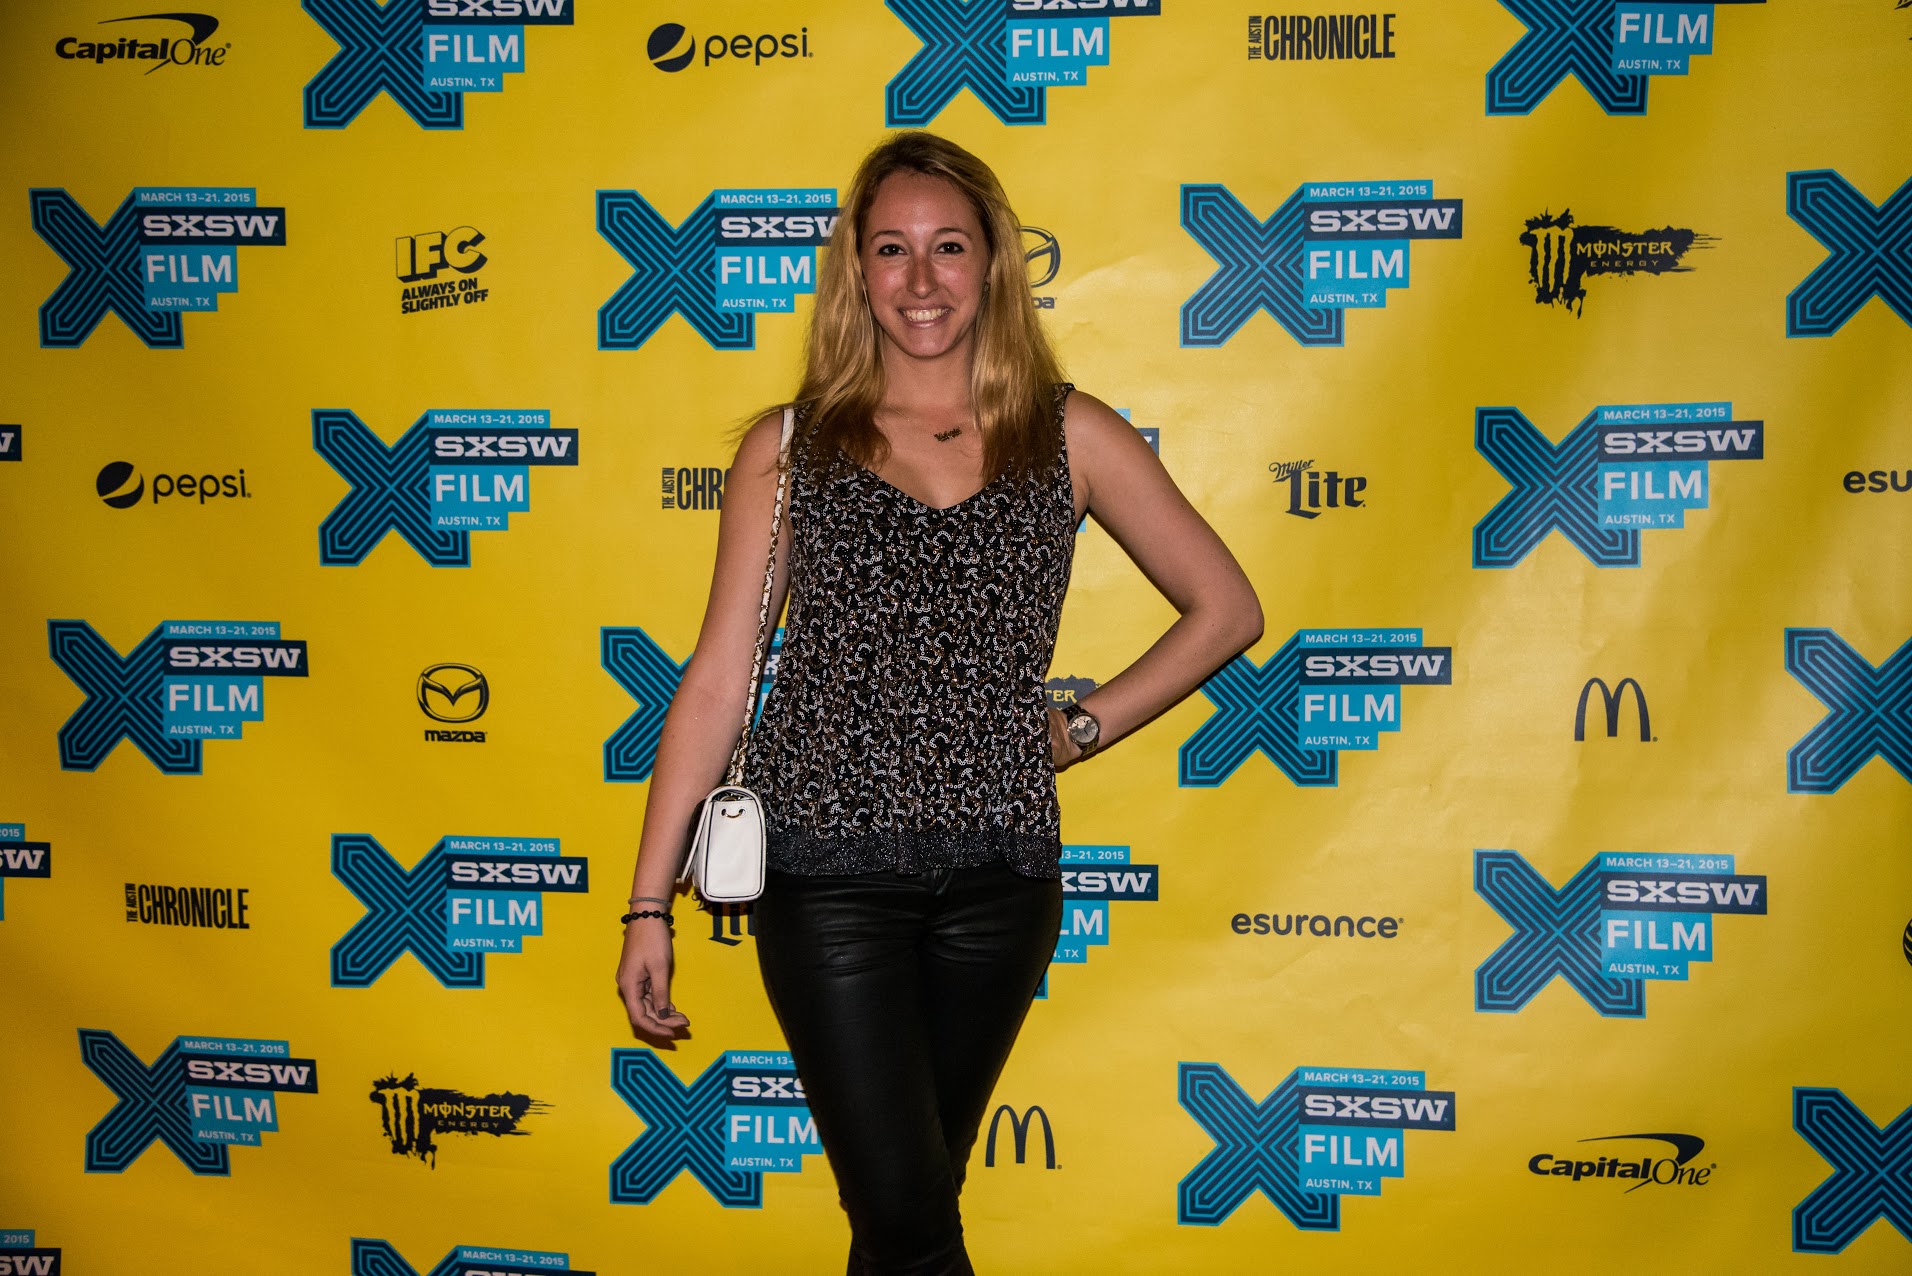 Valerie Krulfeifer at the 2015 premiere of POD at SXSW